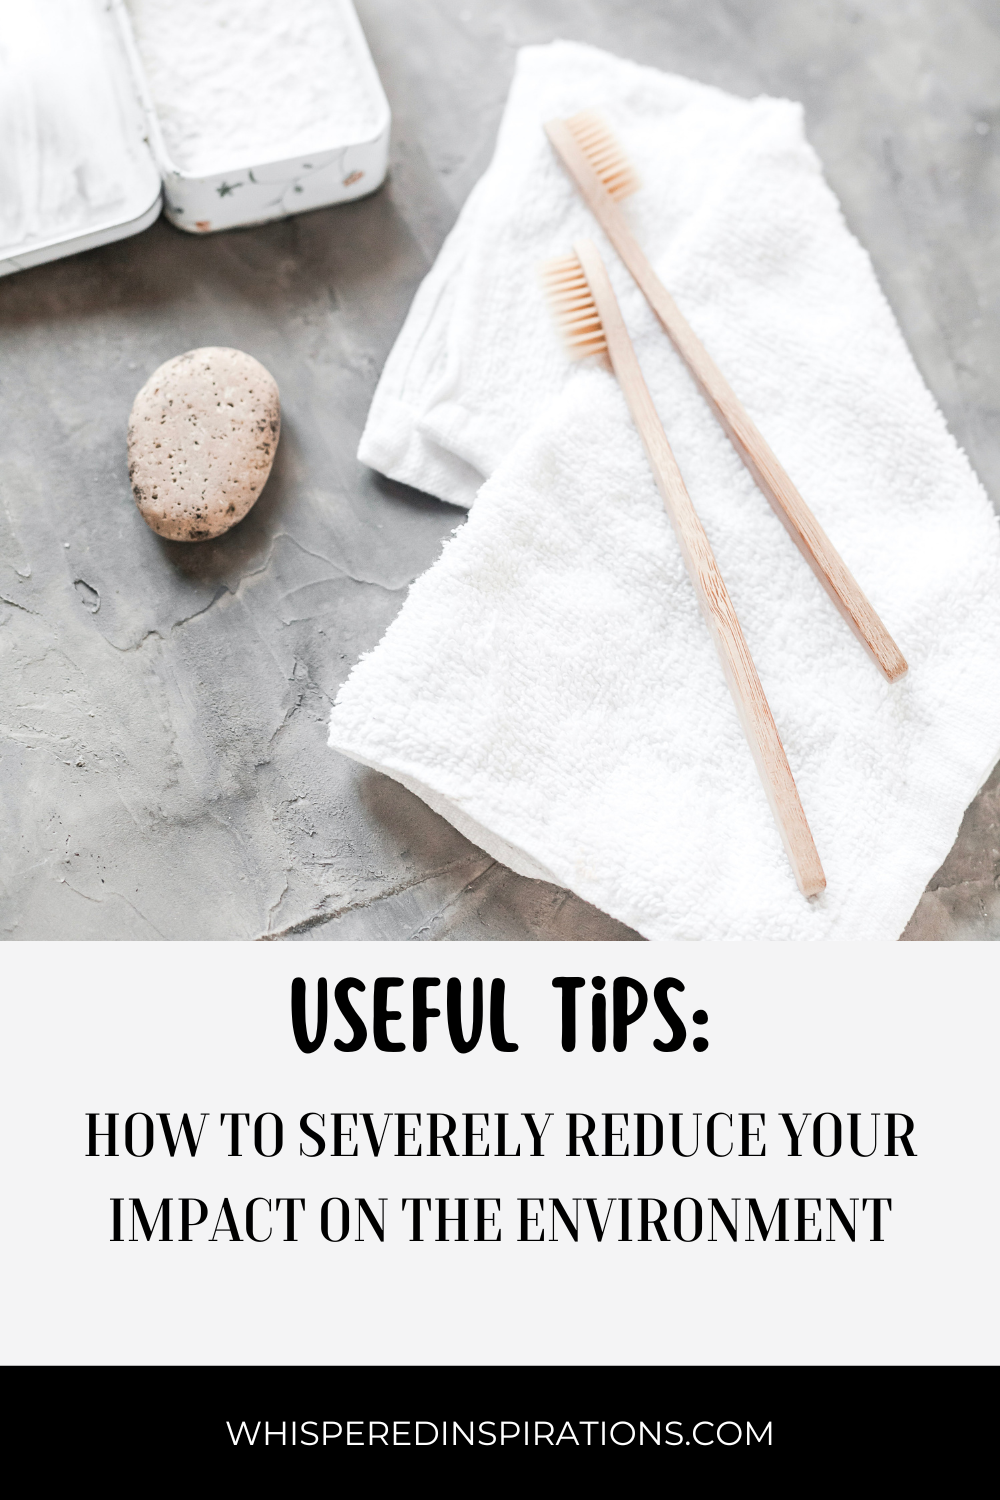 Eco-friendly bamboo toothbrushes are shown on top of a towel, along with homemade toothpaste. This article covers how to severely reduce your impact on the environment.